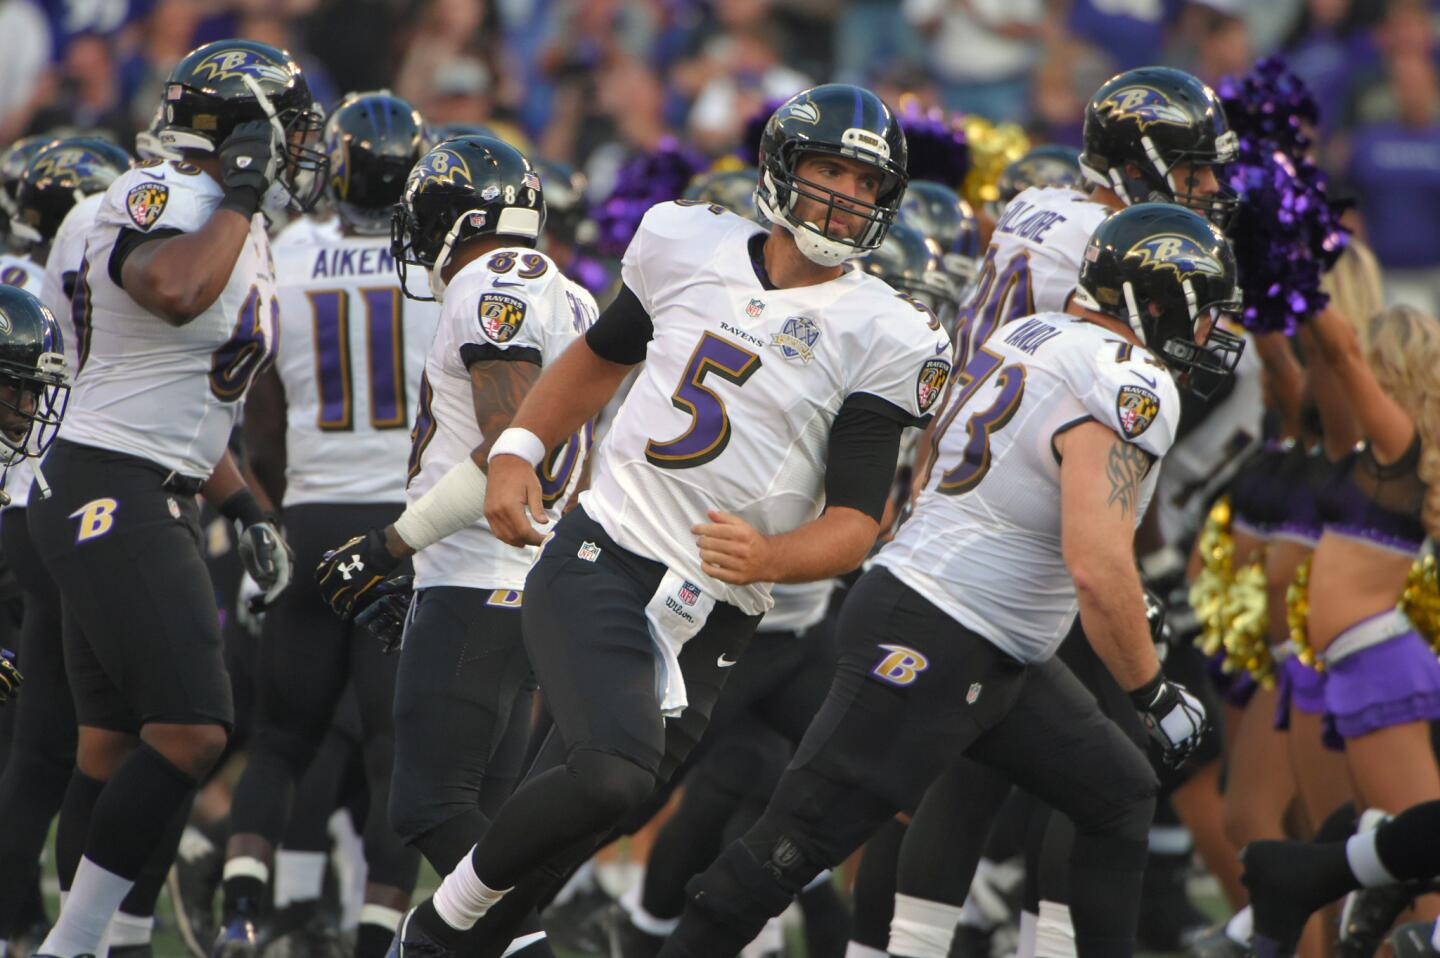 If you’re going to play only one series, might as well hold the ball for more than eight minutes and take a 7-0 lead. For as many minor injuries the Ravens have faced in the first two weeks of preseason, they basically rolled out their projected starting offense to begin the game. And Joe Flacco and Co. did new offensive coordinator Marc Trestman proud. Flacco completed five passes, three of them to backs and another to tight end Crocket Gillmore. Lorenzo Taliaferro ran hard, picking up 19 yards on six carries and punching in a touchdown on fourth down. We’re not going to get a great feel for Trestman’s offense from a few preseason series. But he lived up to his reputation for calling passes to running backs. And despite his pass-happy background, he called for 10 runs on the opening drive. It would have been fun to watch injured first-round NFL draft pick Breshad Perriman. We still have no idea whether he or someone else can fill Torrey Smith’s shoes as a deep target for Flacco. That will be a key during the season, because Flacco isn’t Flacco without a home run threat. But for eight minutes at least, this was the balanced attack Ravens fans hoped to see.